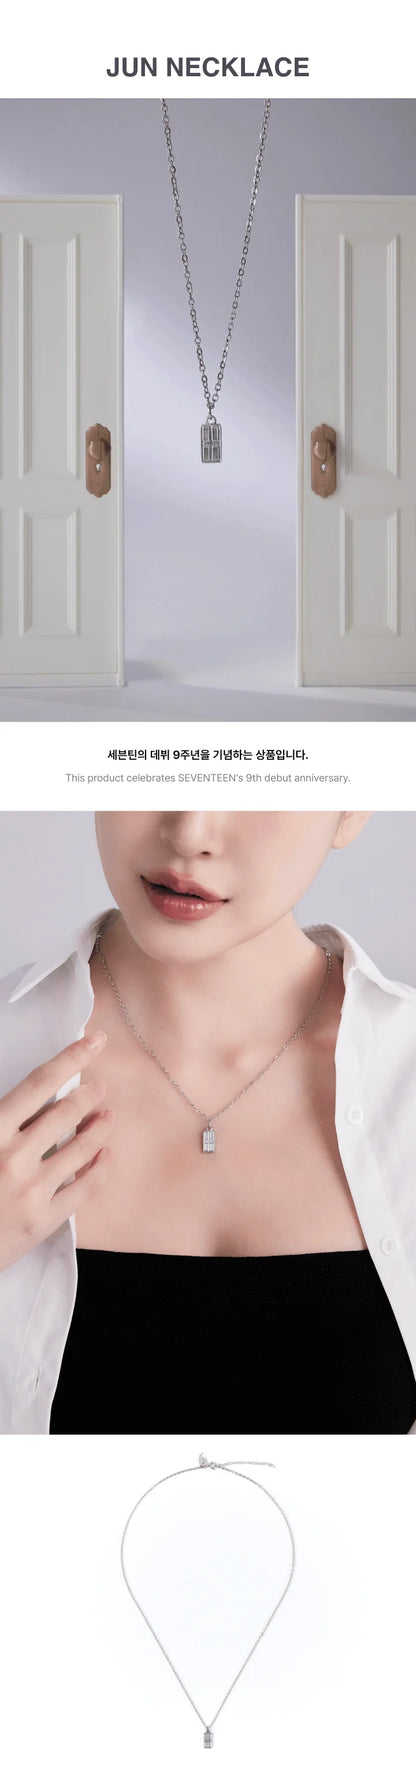 [PRE ORDER] SEVENTEEN - 9TH ANNIVERSARY (Official MD) / NECKLACE: JUN 